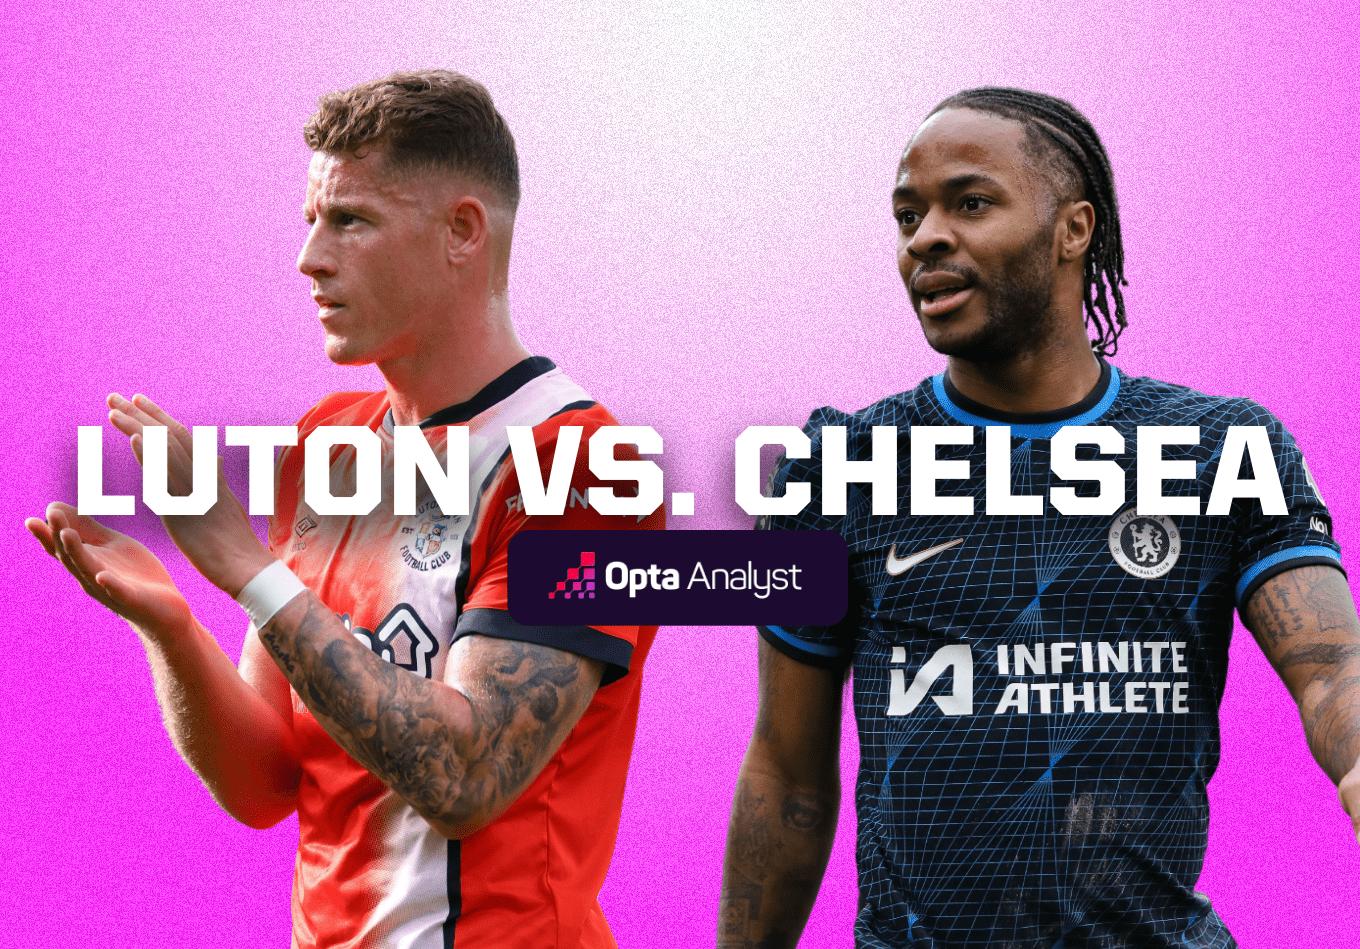 Luton vs Chelsea: Prediction and Preview